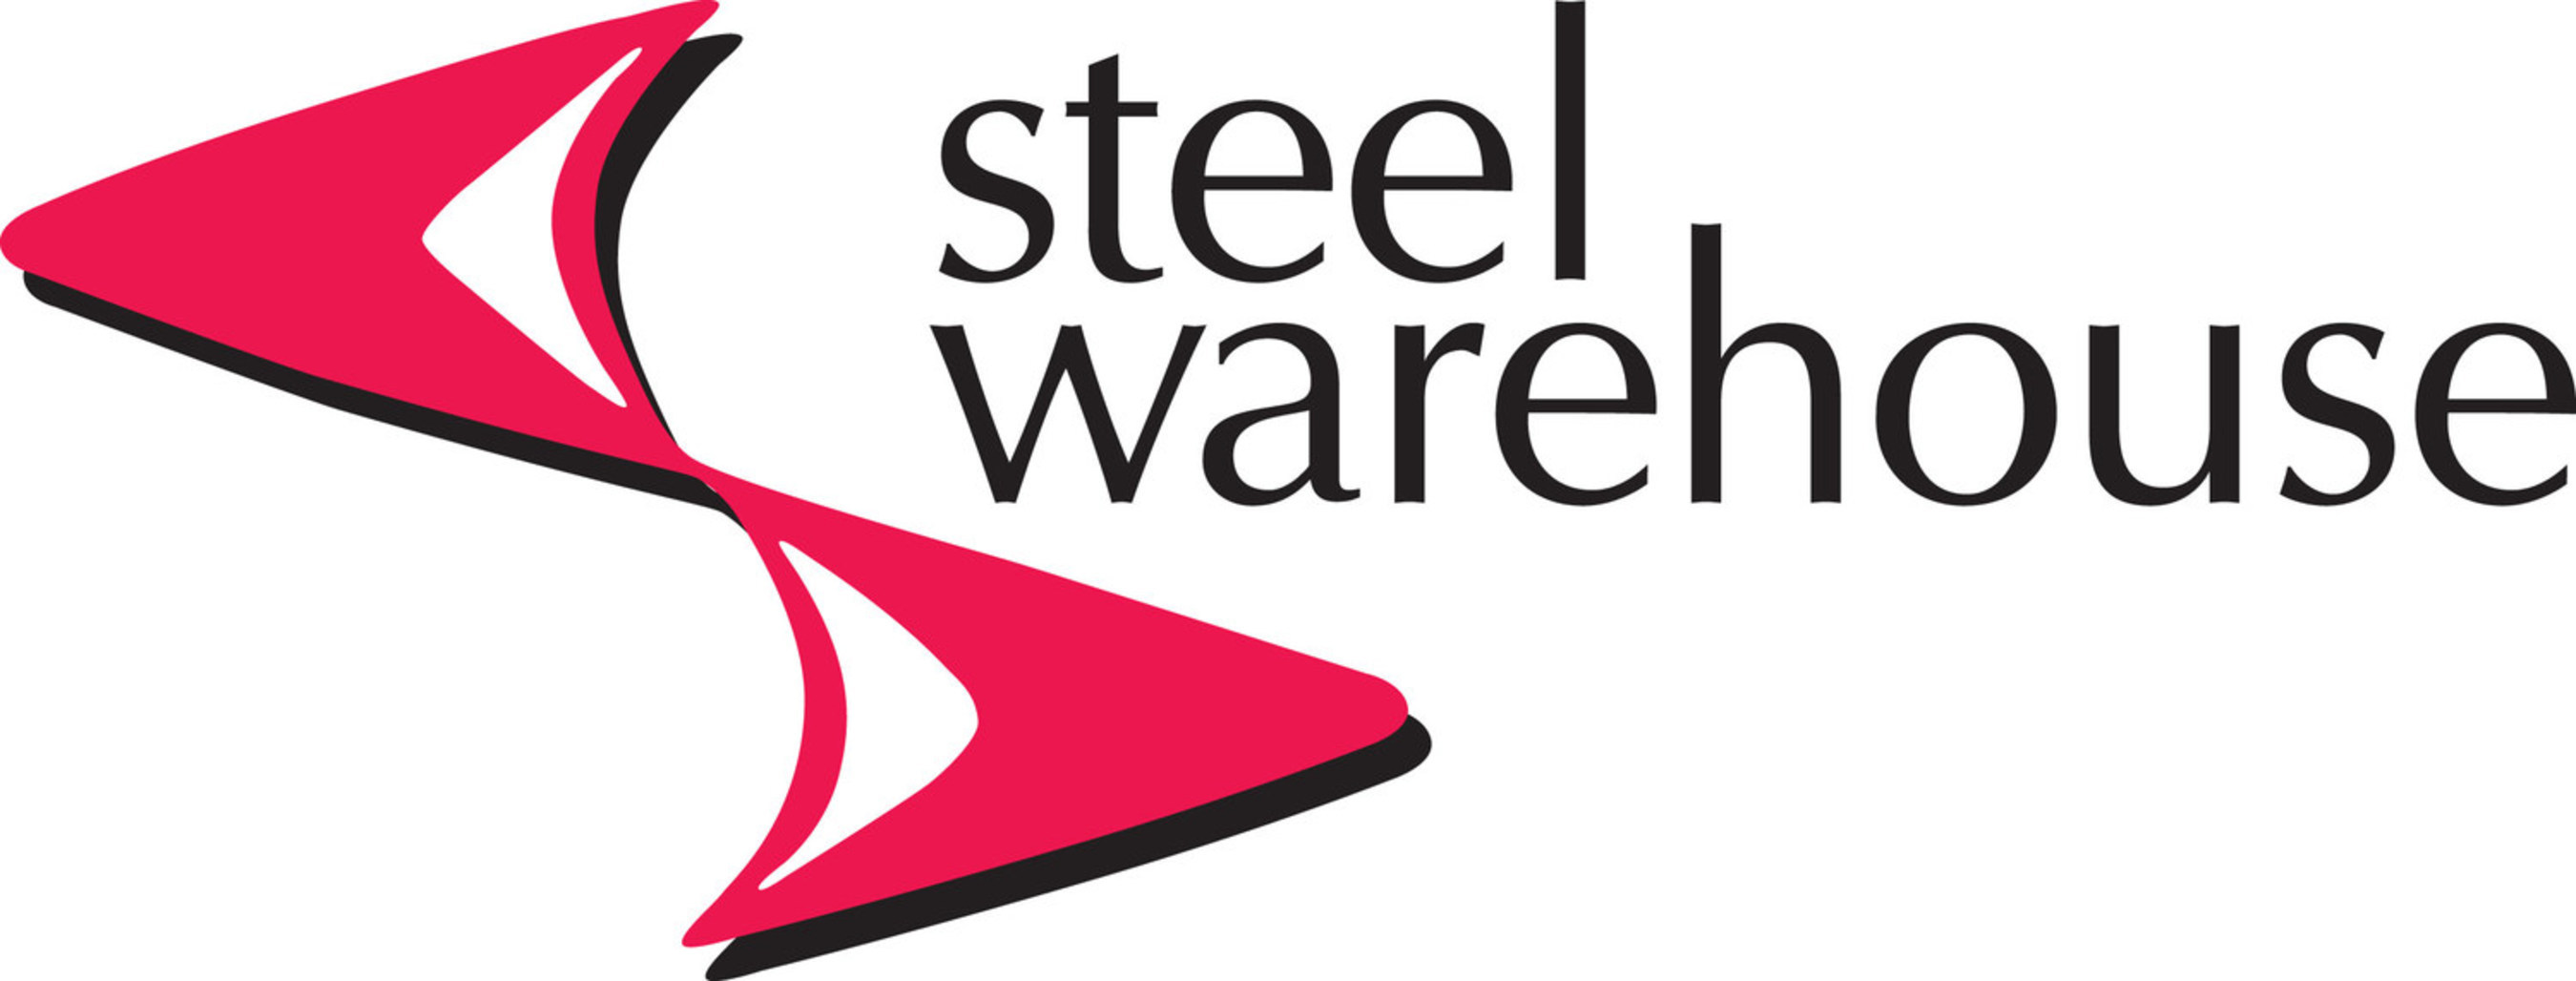 Steel Warehouse acquires Seigal Steel, a Chicago, IL service center